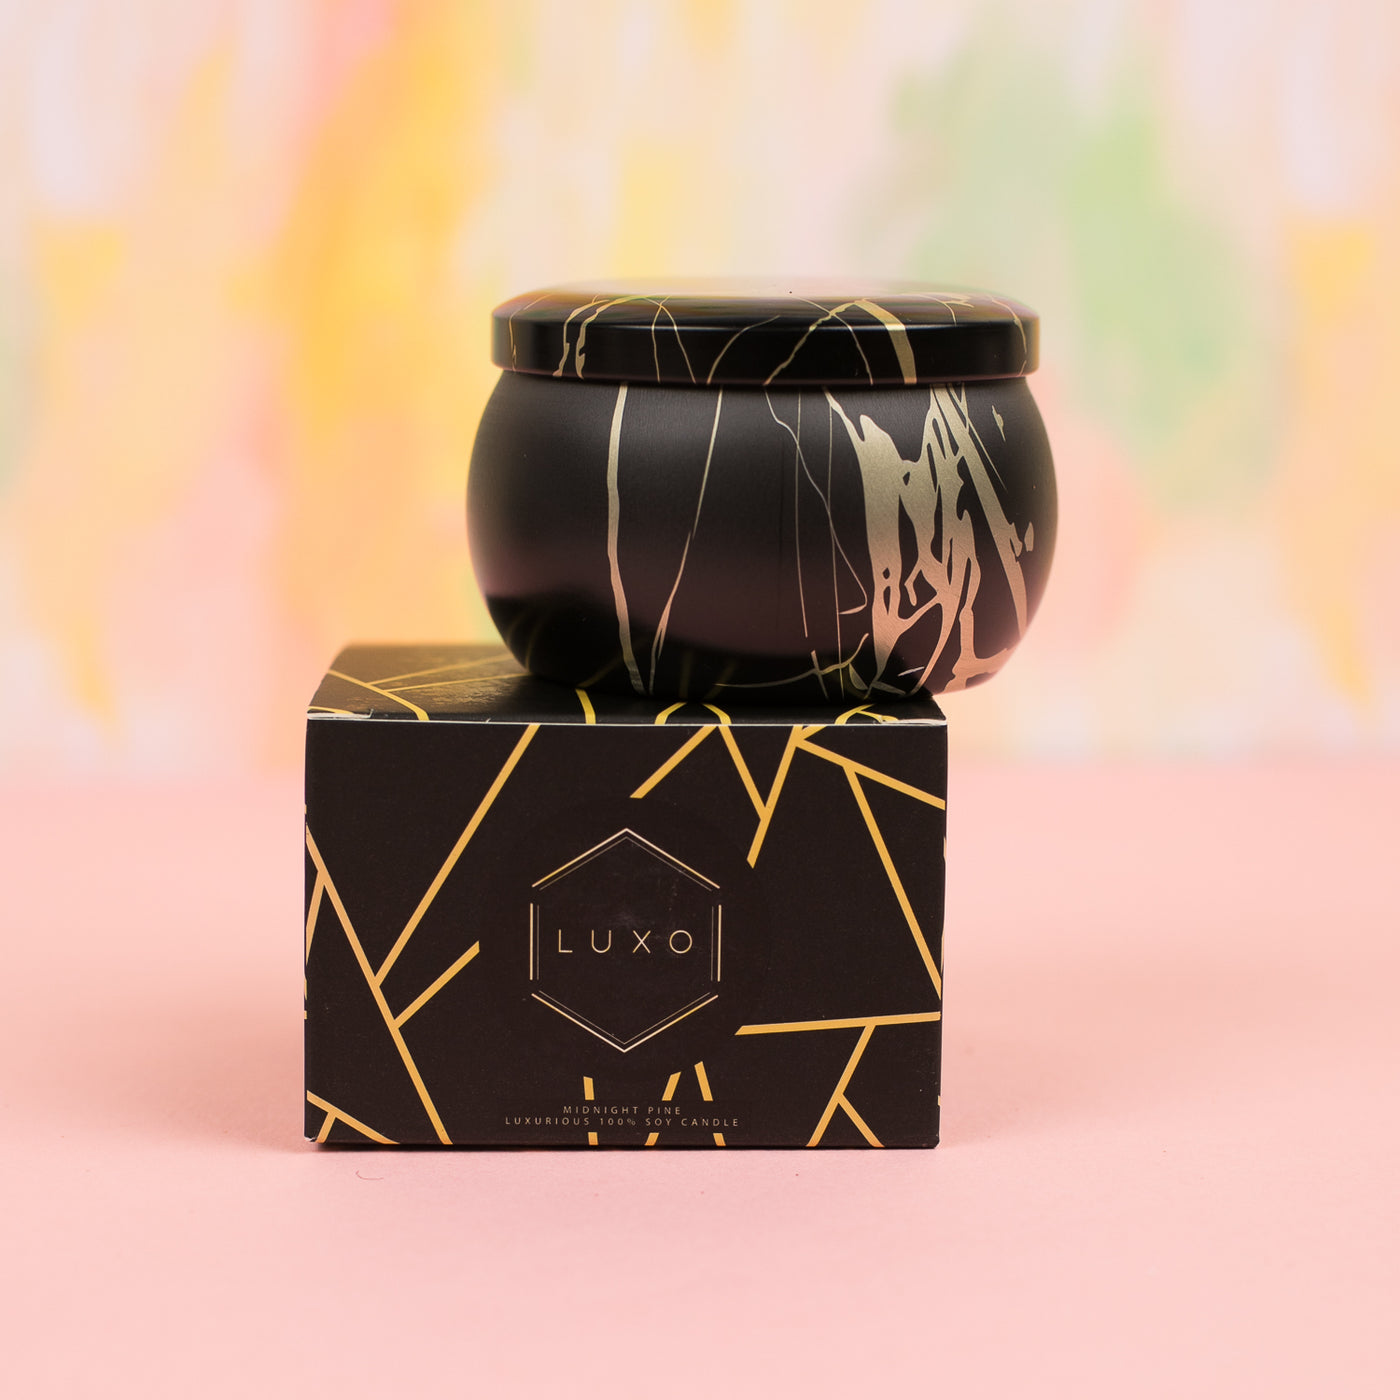 100% Soy Wax Midnight Pine Luxury Candle